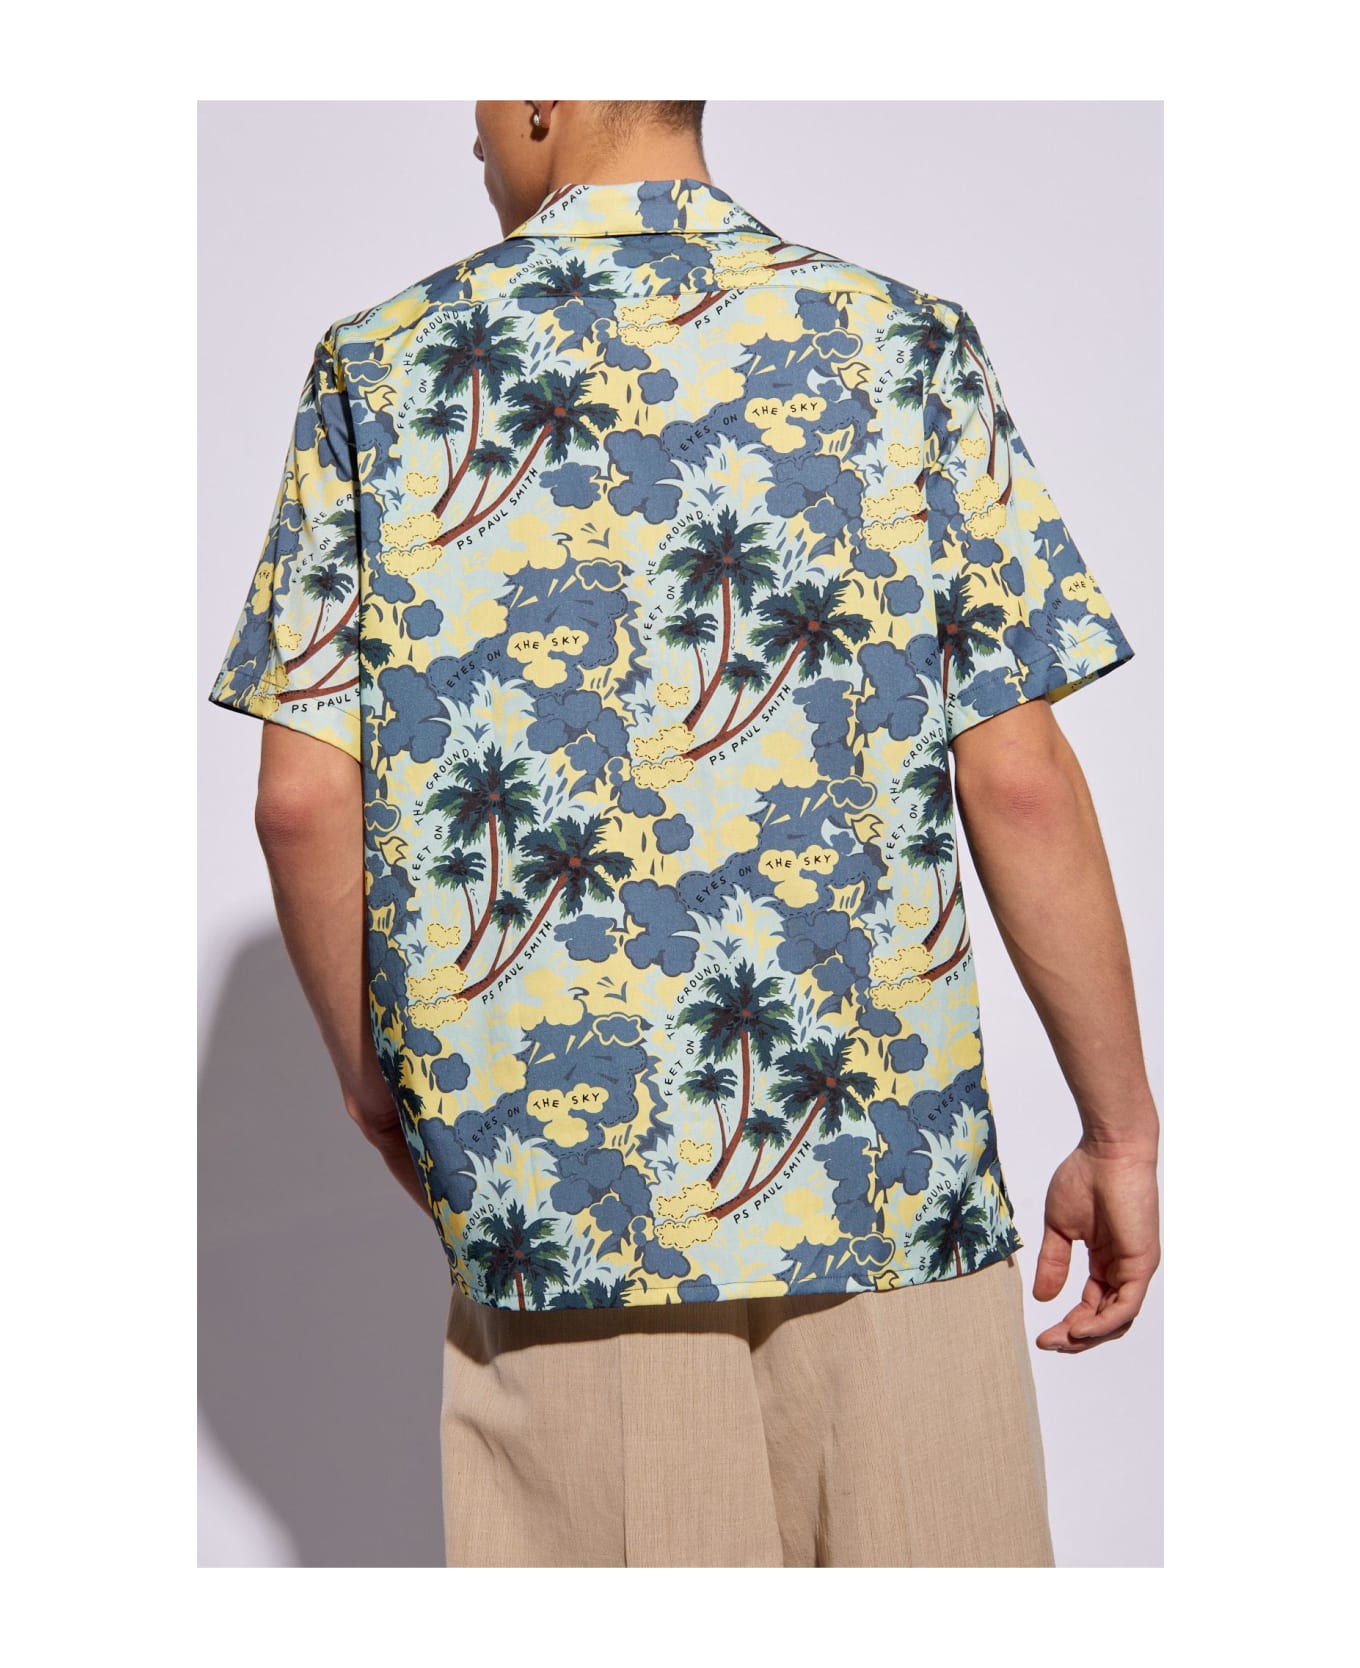 PS by Paul Smith Ps Paul Smith Printed Shirt - NAVY